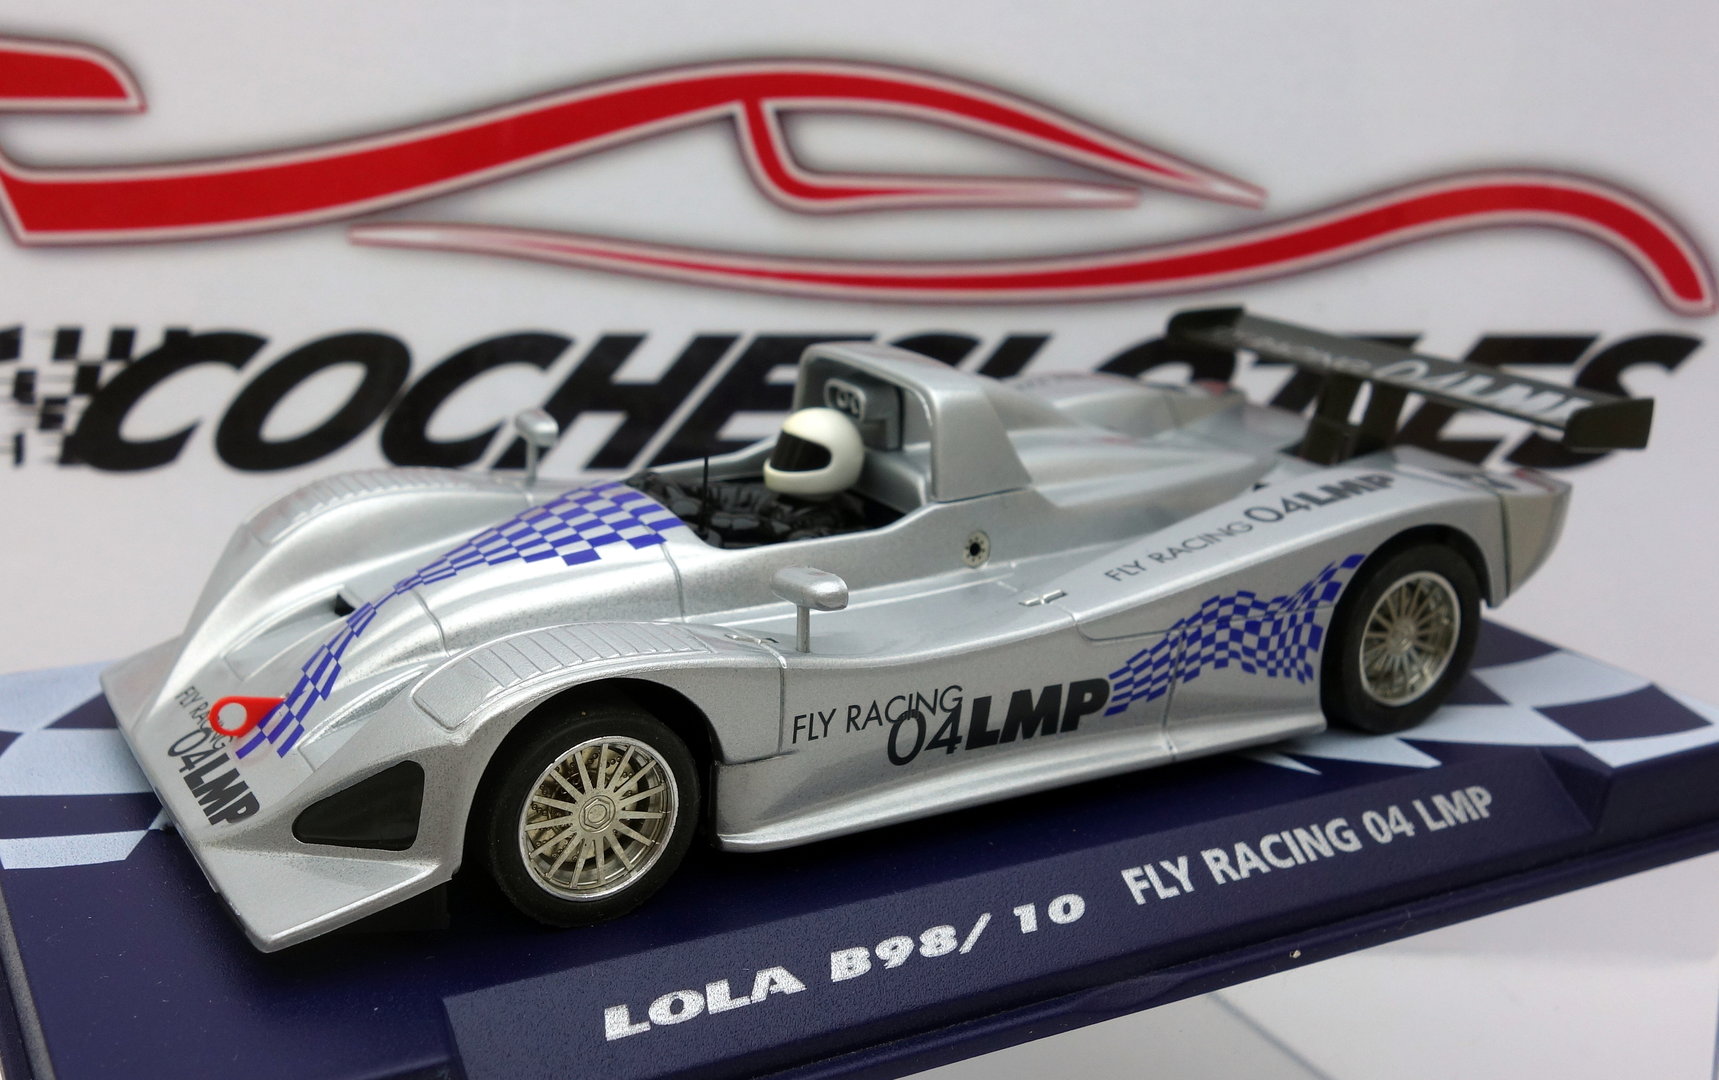 Fly Slot Car Scx Scalextric Fly 07031 Lola B98/10 Fly Racing 04 Lmp 